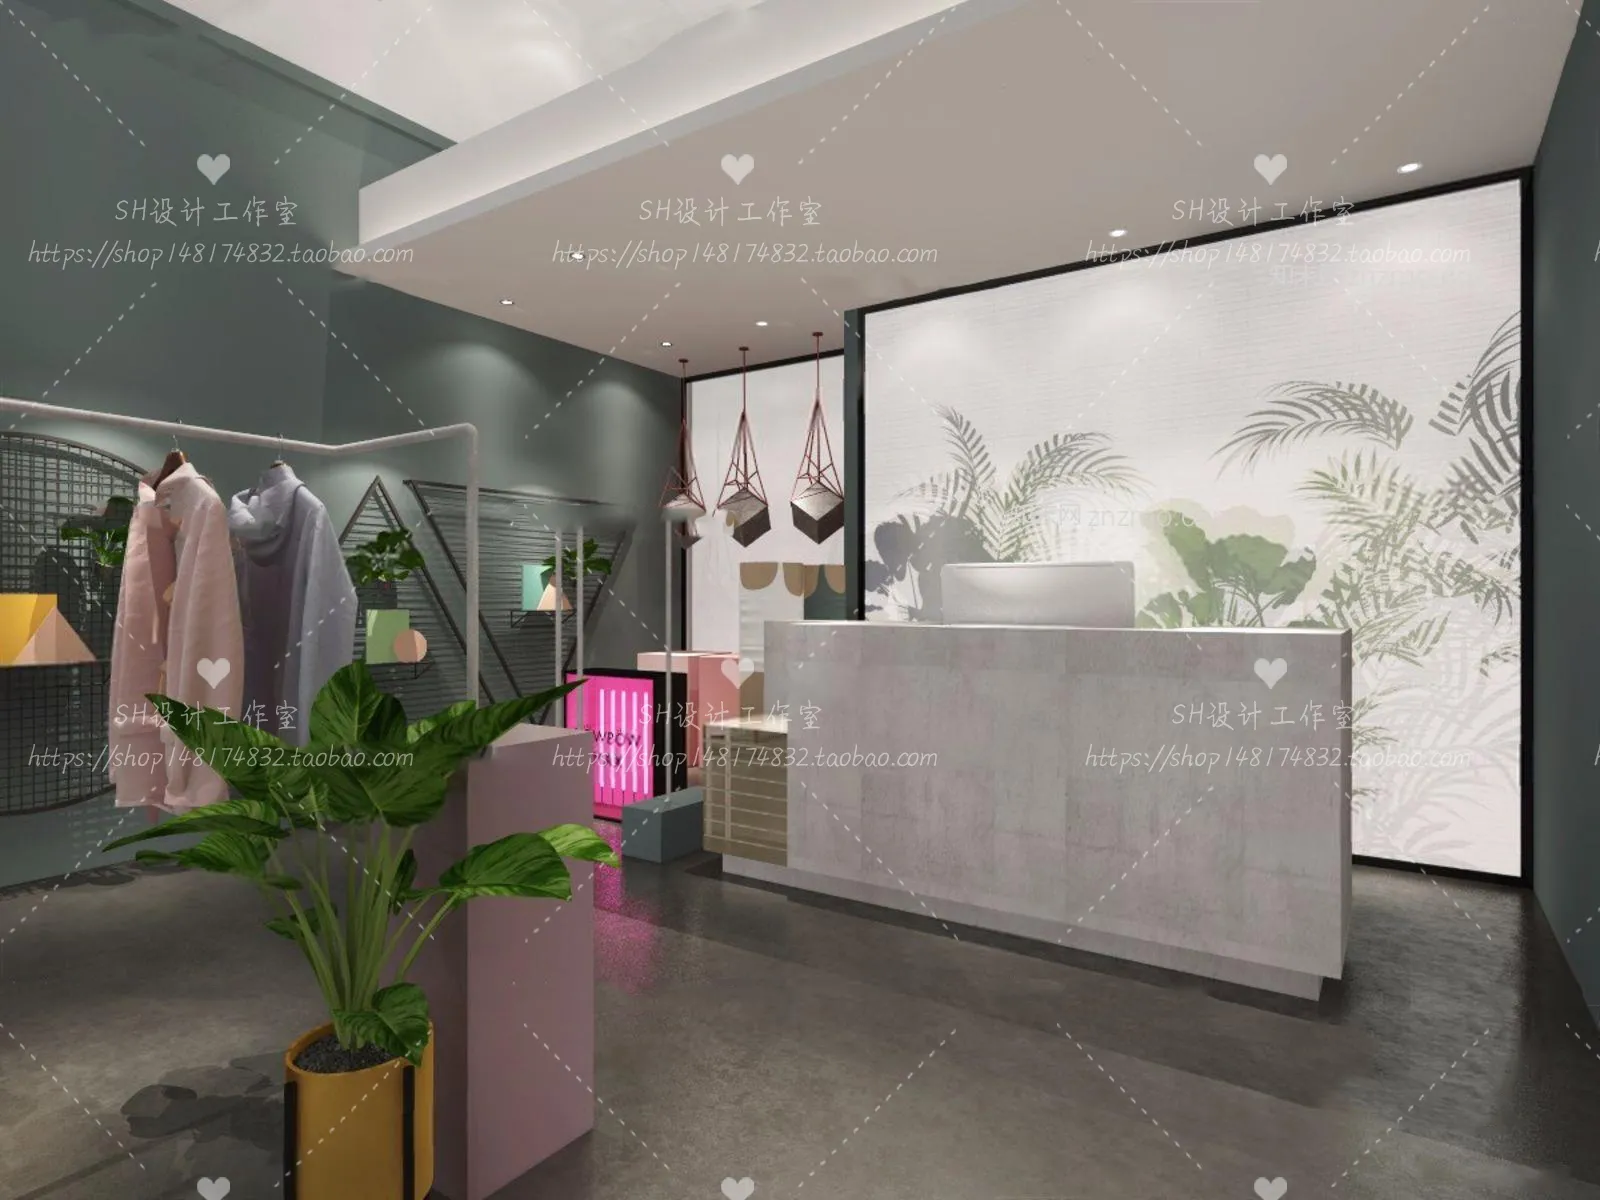 CLOTHING STORE 3D SCENES – VRAY RENDER – 27